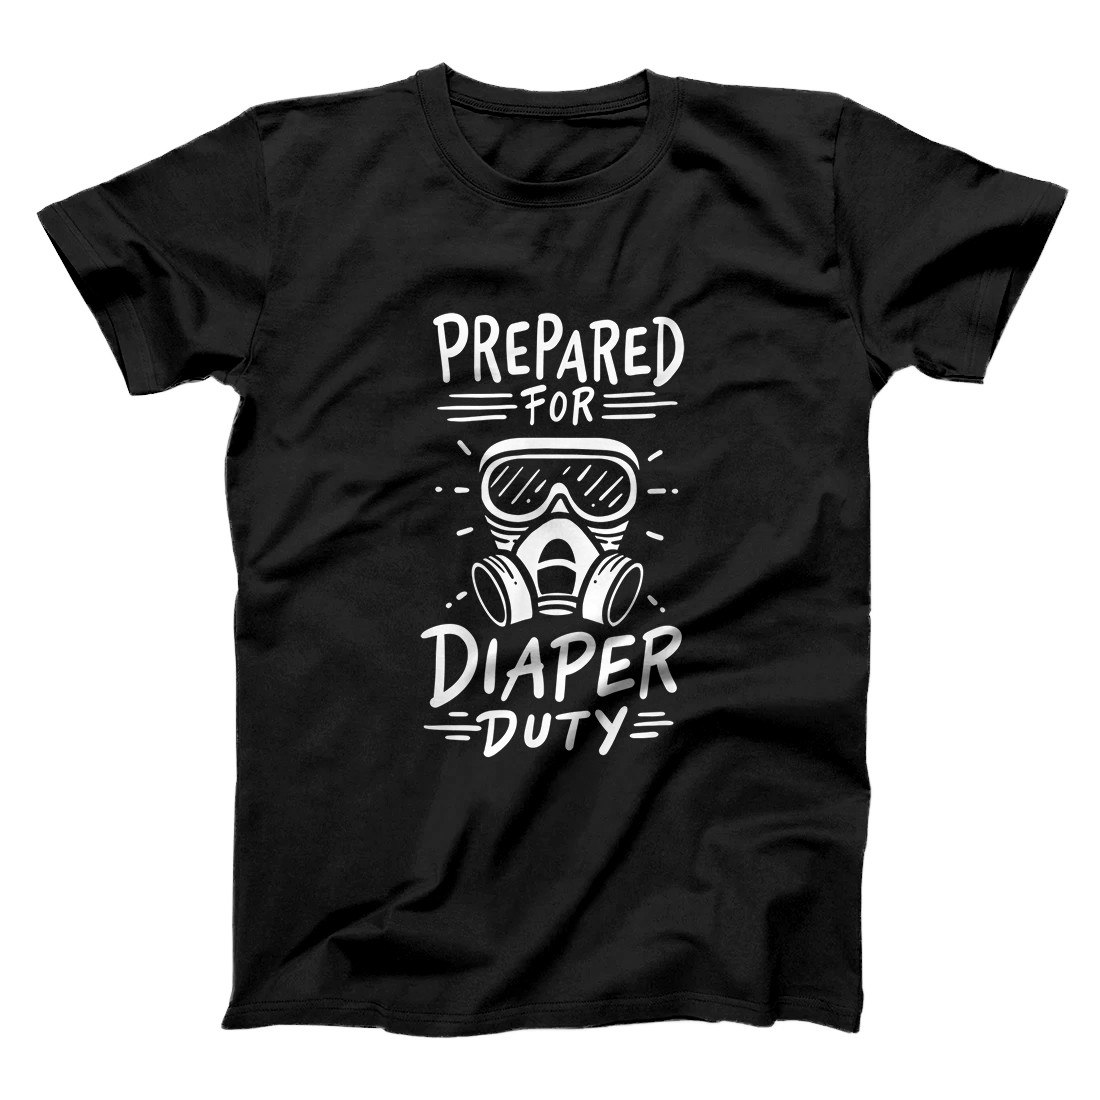 Personalized Diaper Duty, Prepper & Survivalism New Father T-Shirt